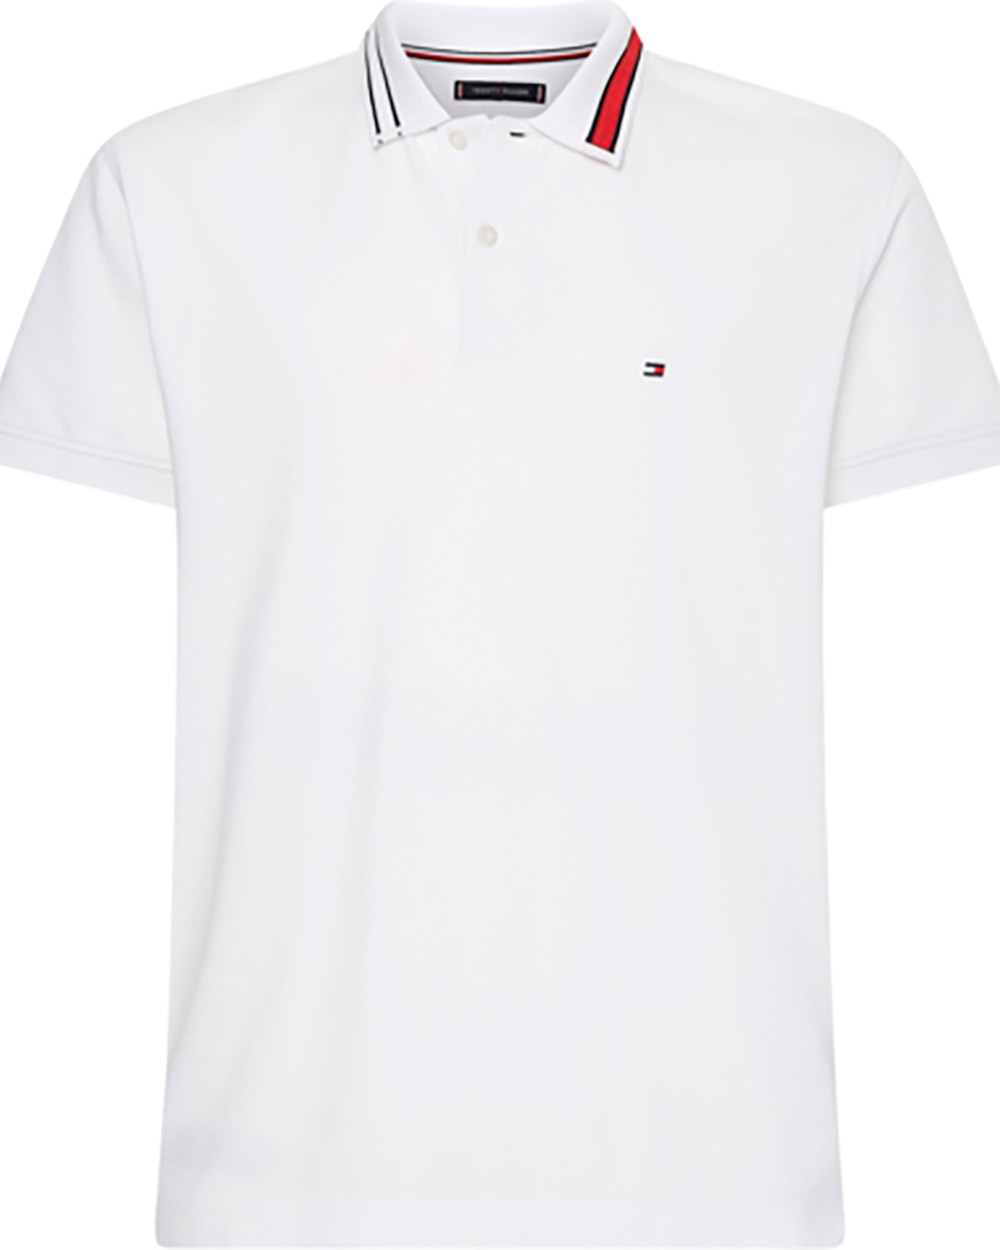 TOMMY HILFIGER Sophisticated Tipping Reg - Polo